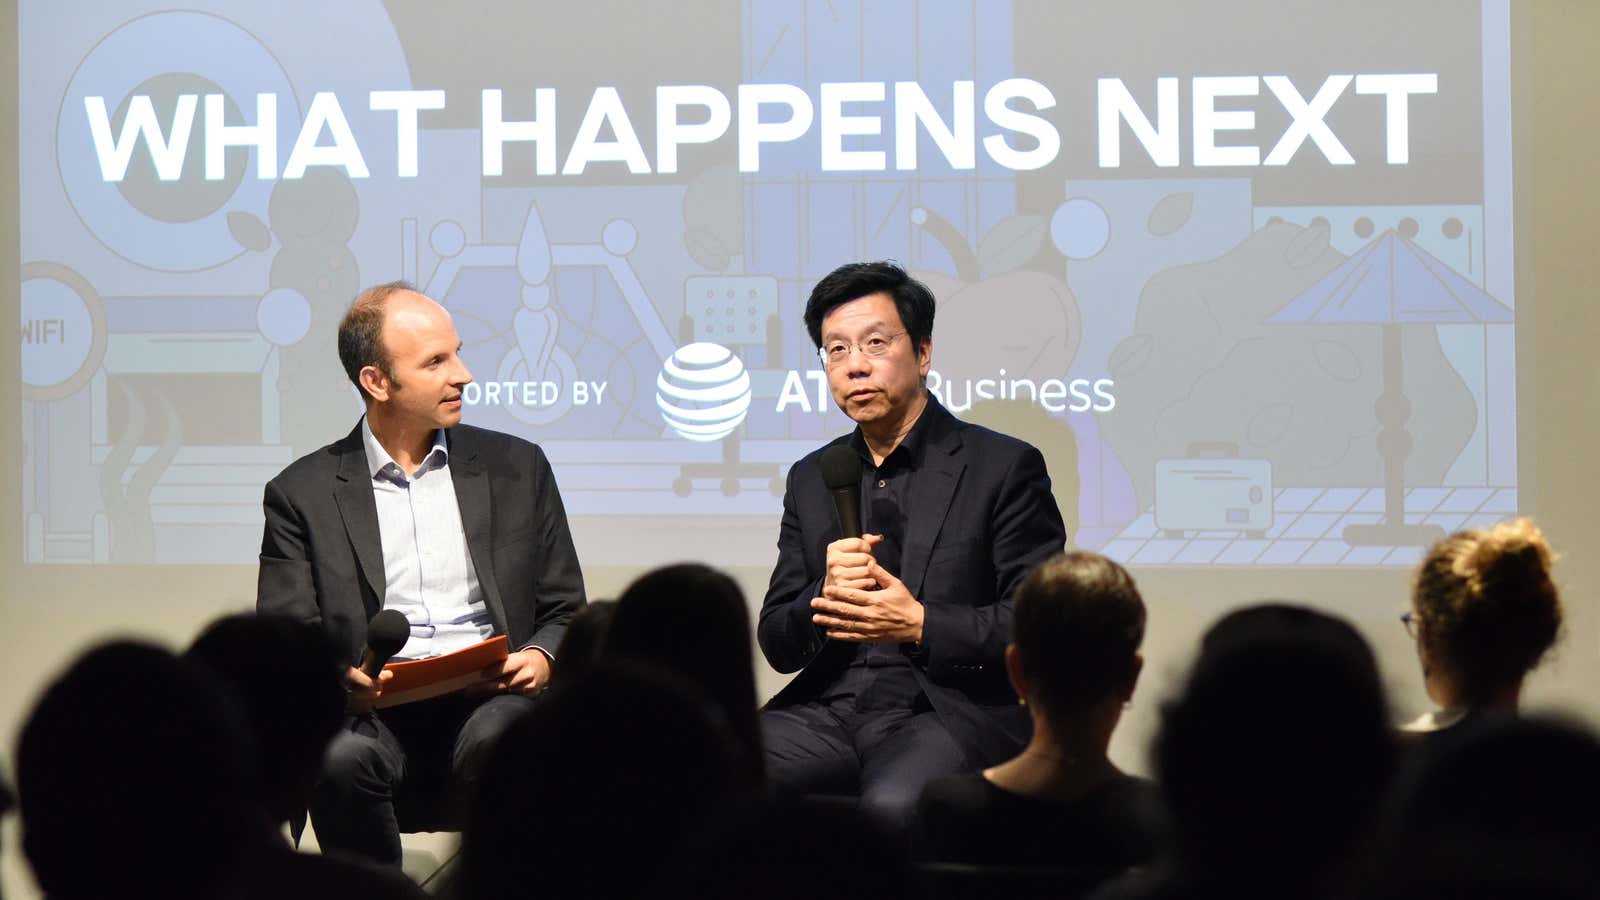 Kai-Fu Lee (right) speaks to Quartz’s Kevin Delaney at an event on Oct. 9.